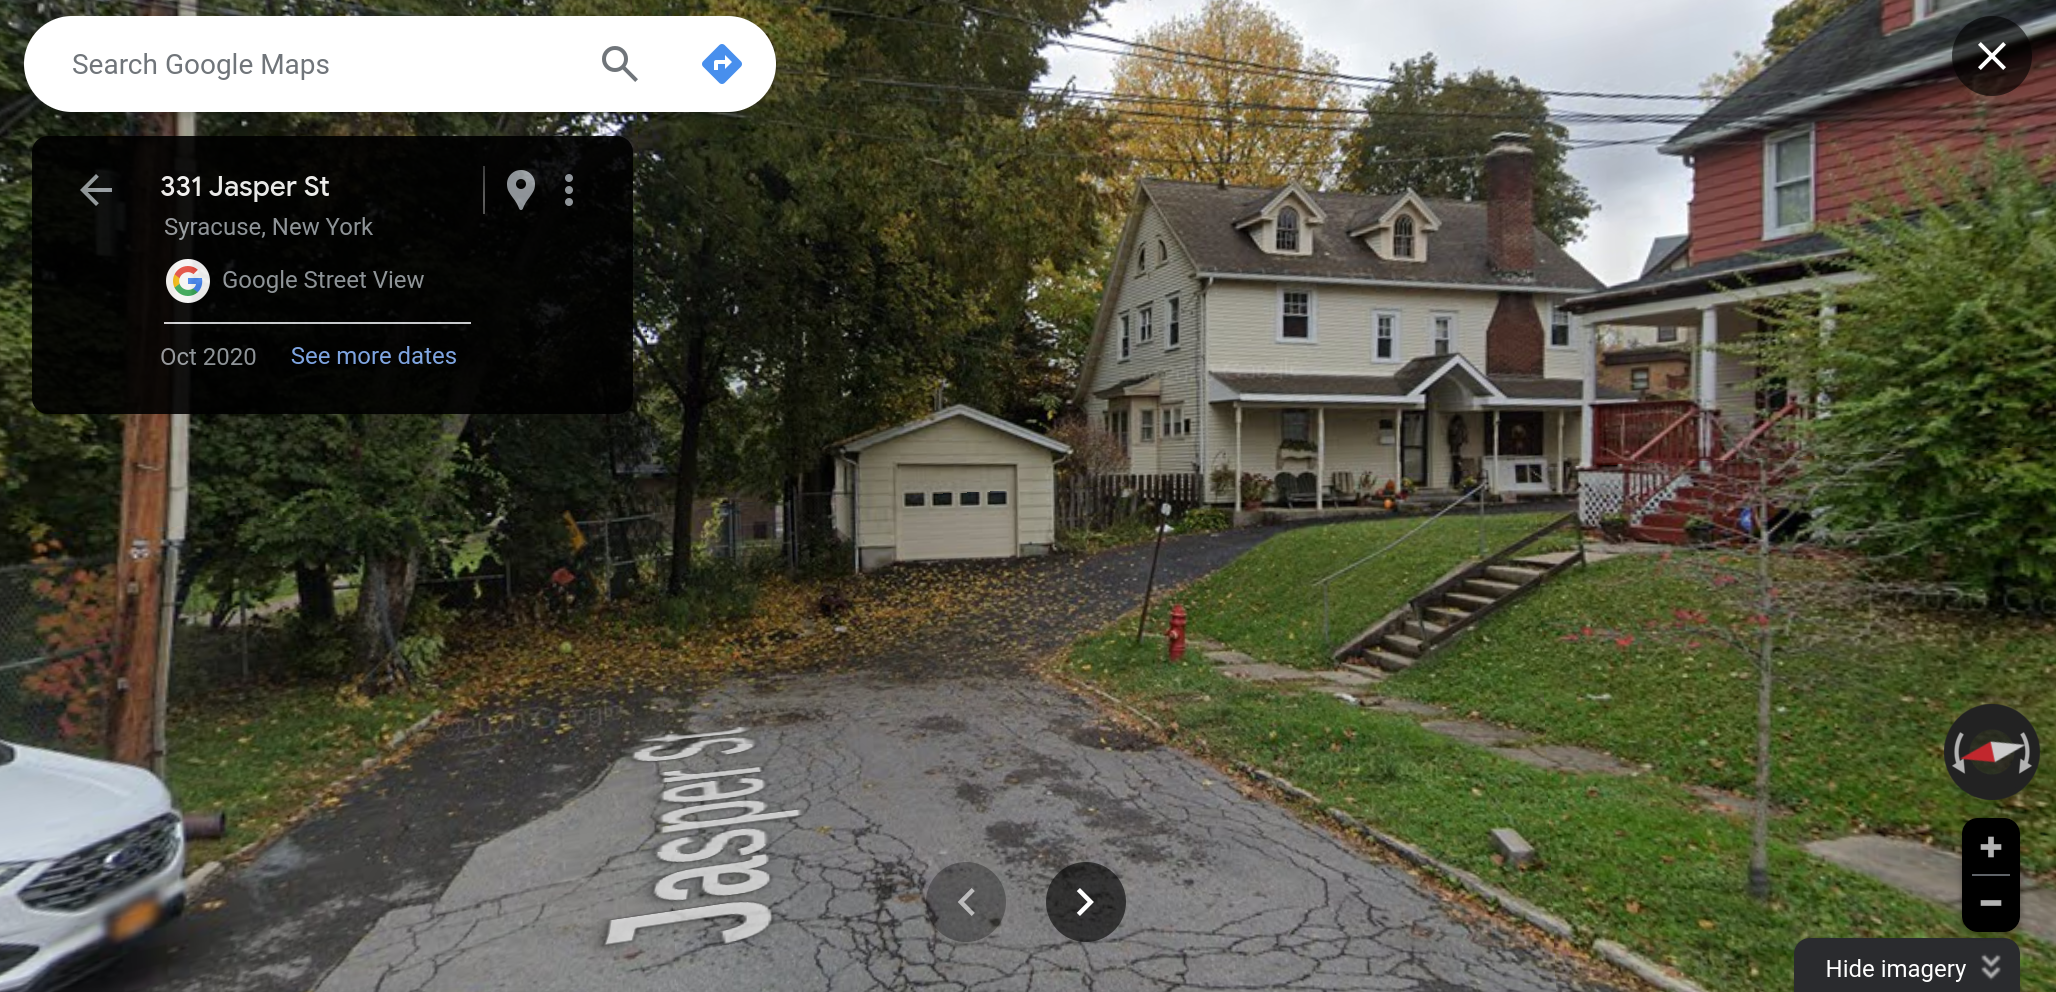 I found their house on Google Maps. Sure has changed in 50 years.